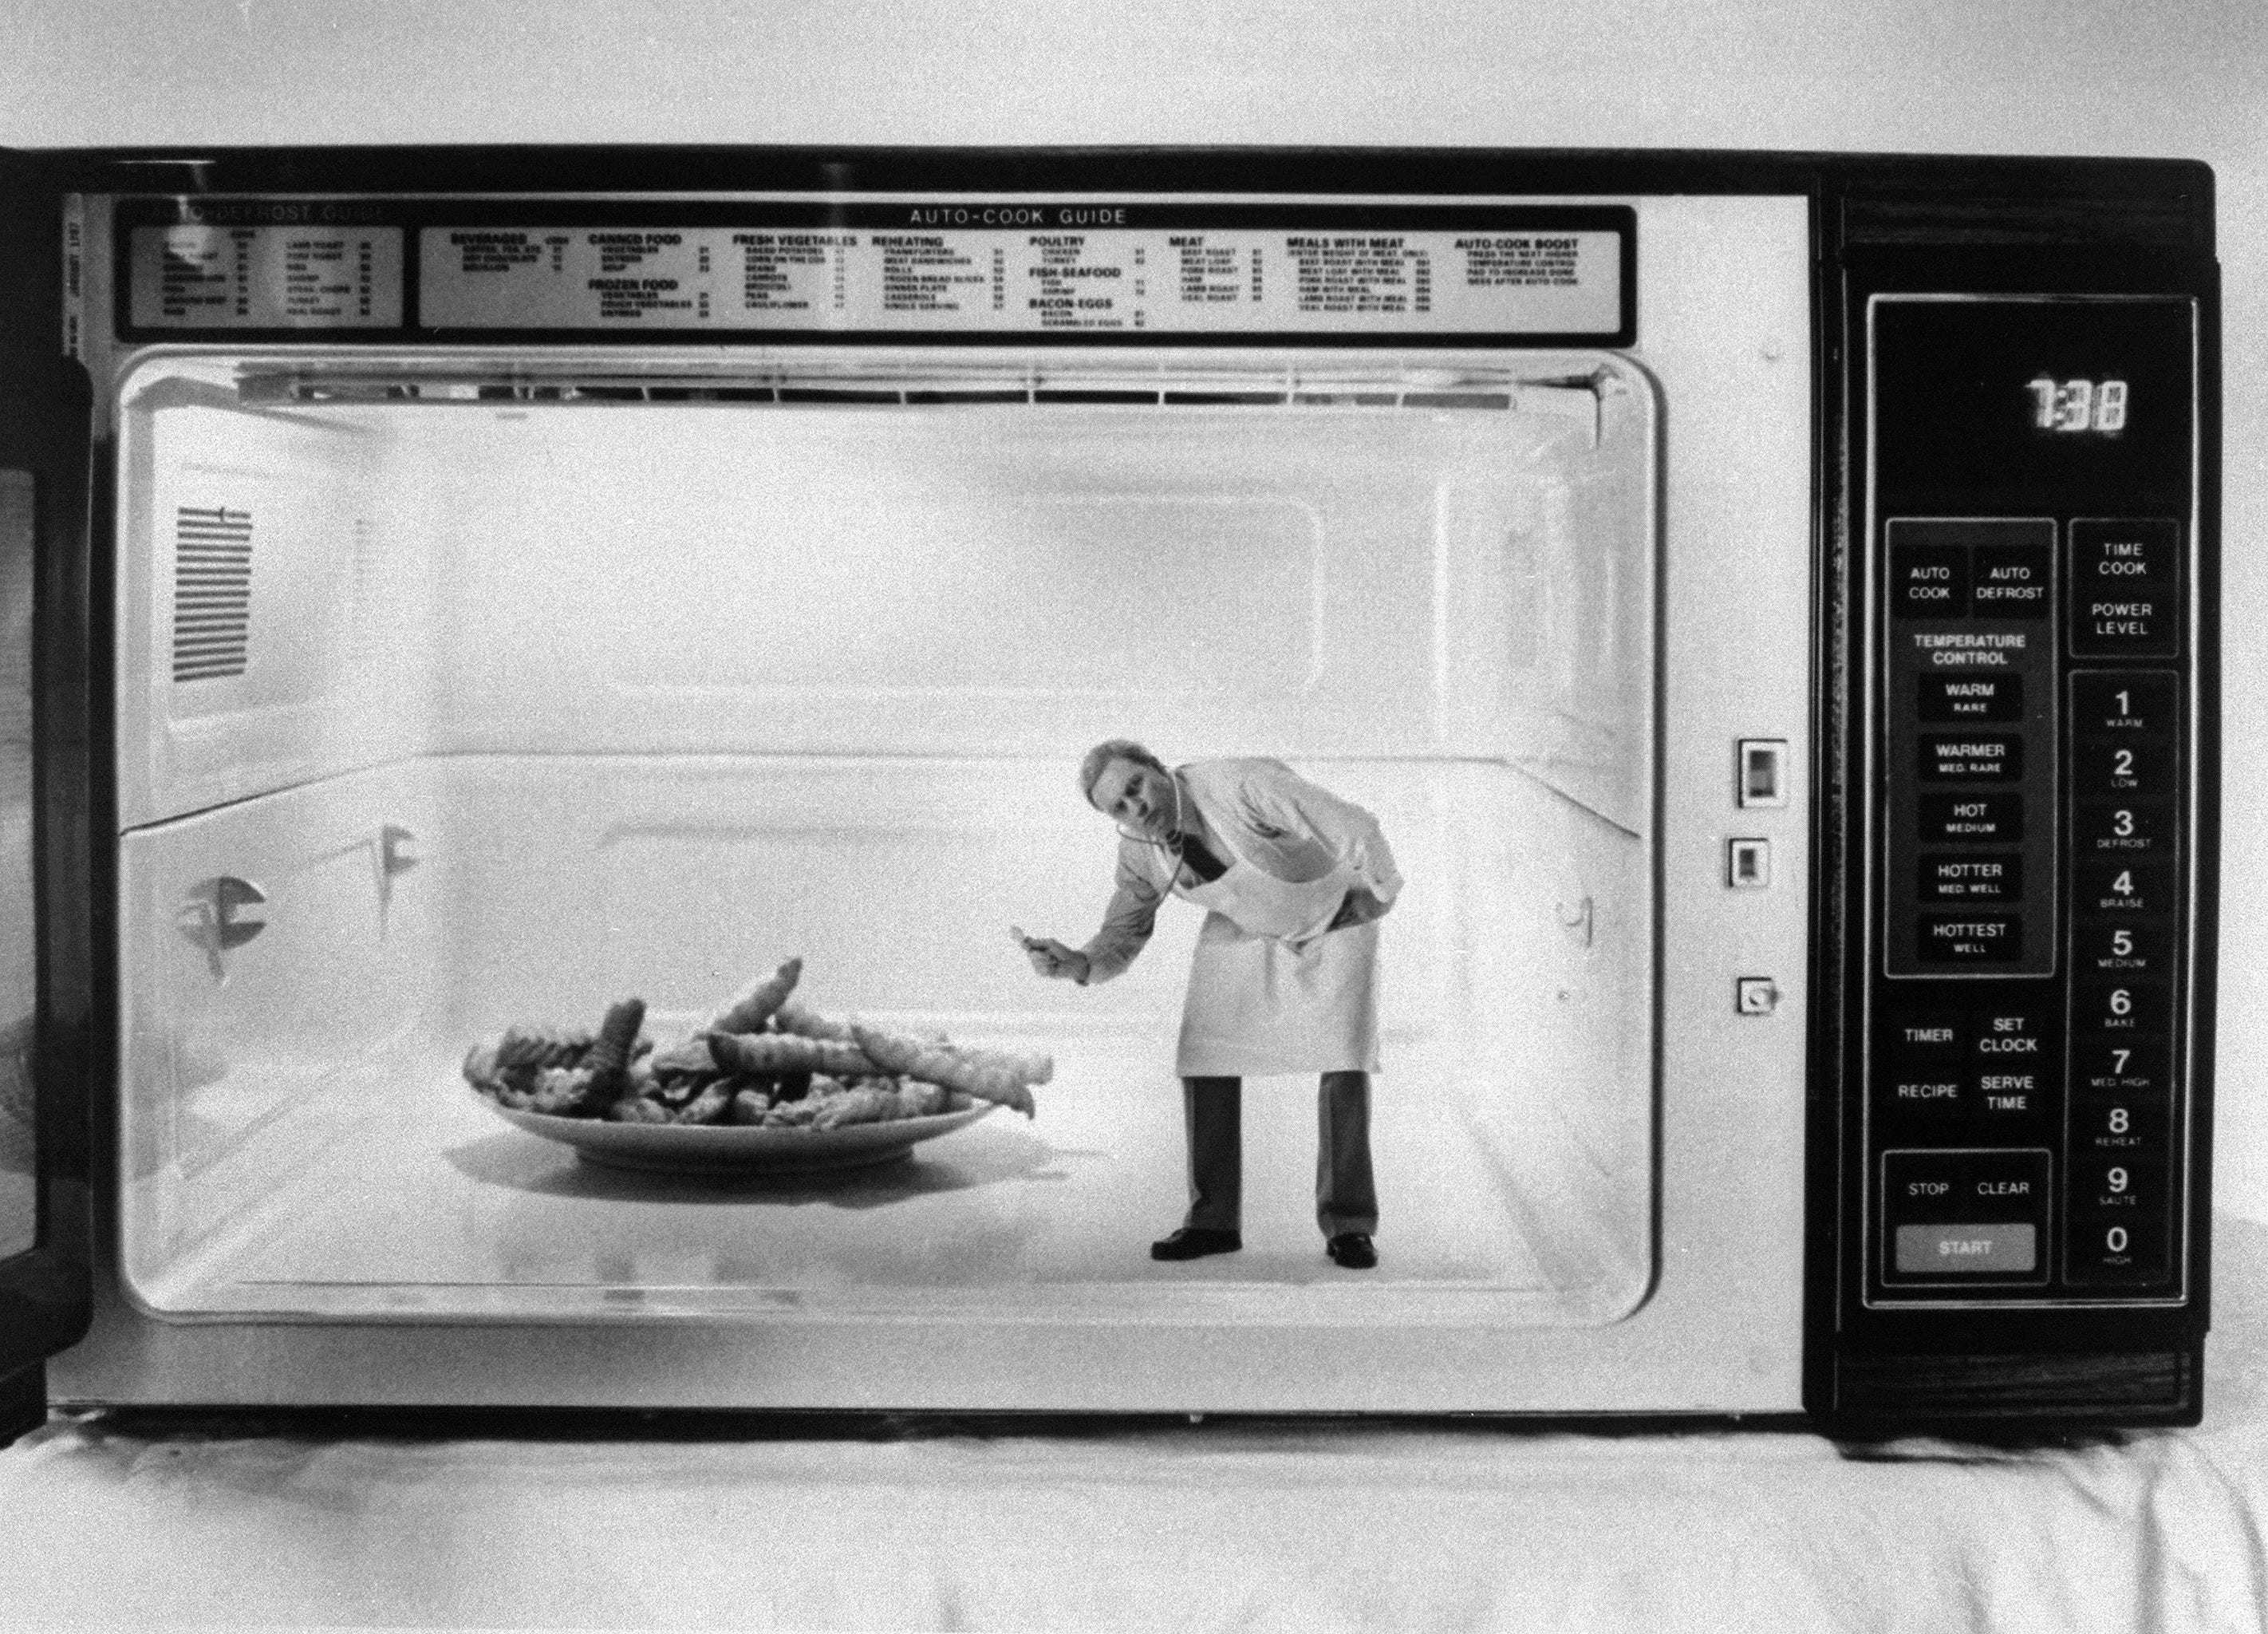 First microwave oven imported - Australian food history timeline